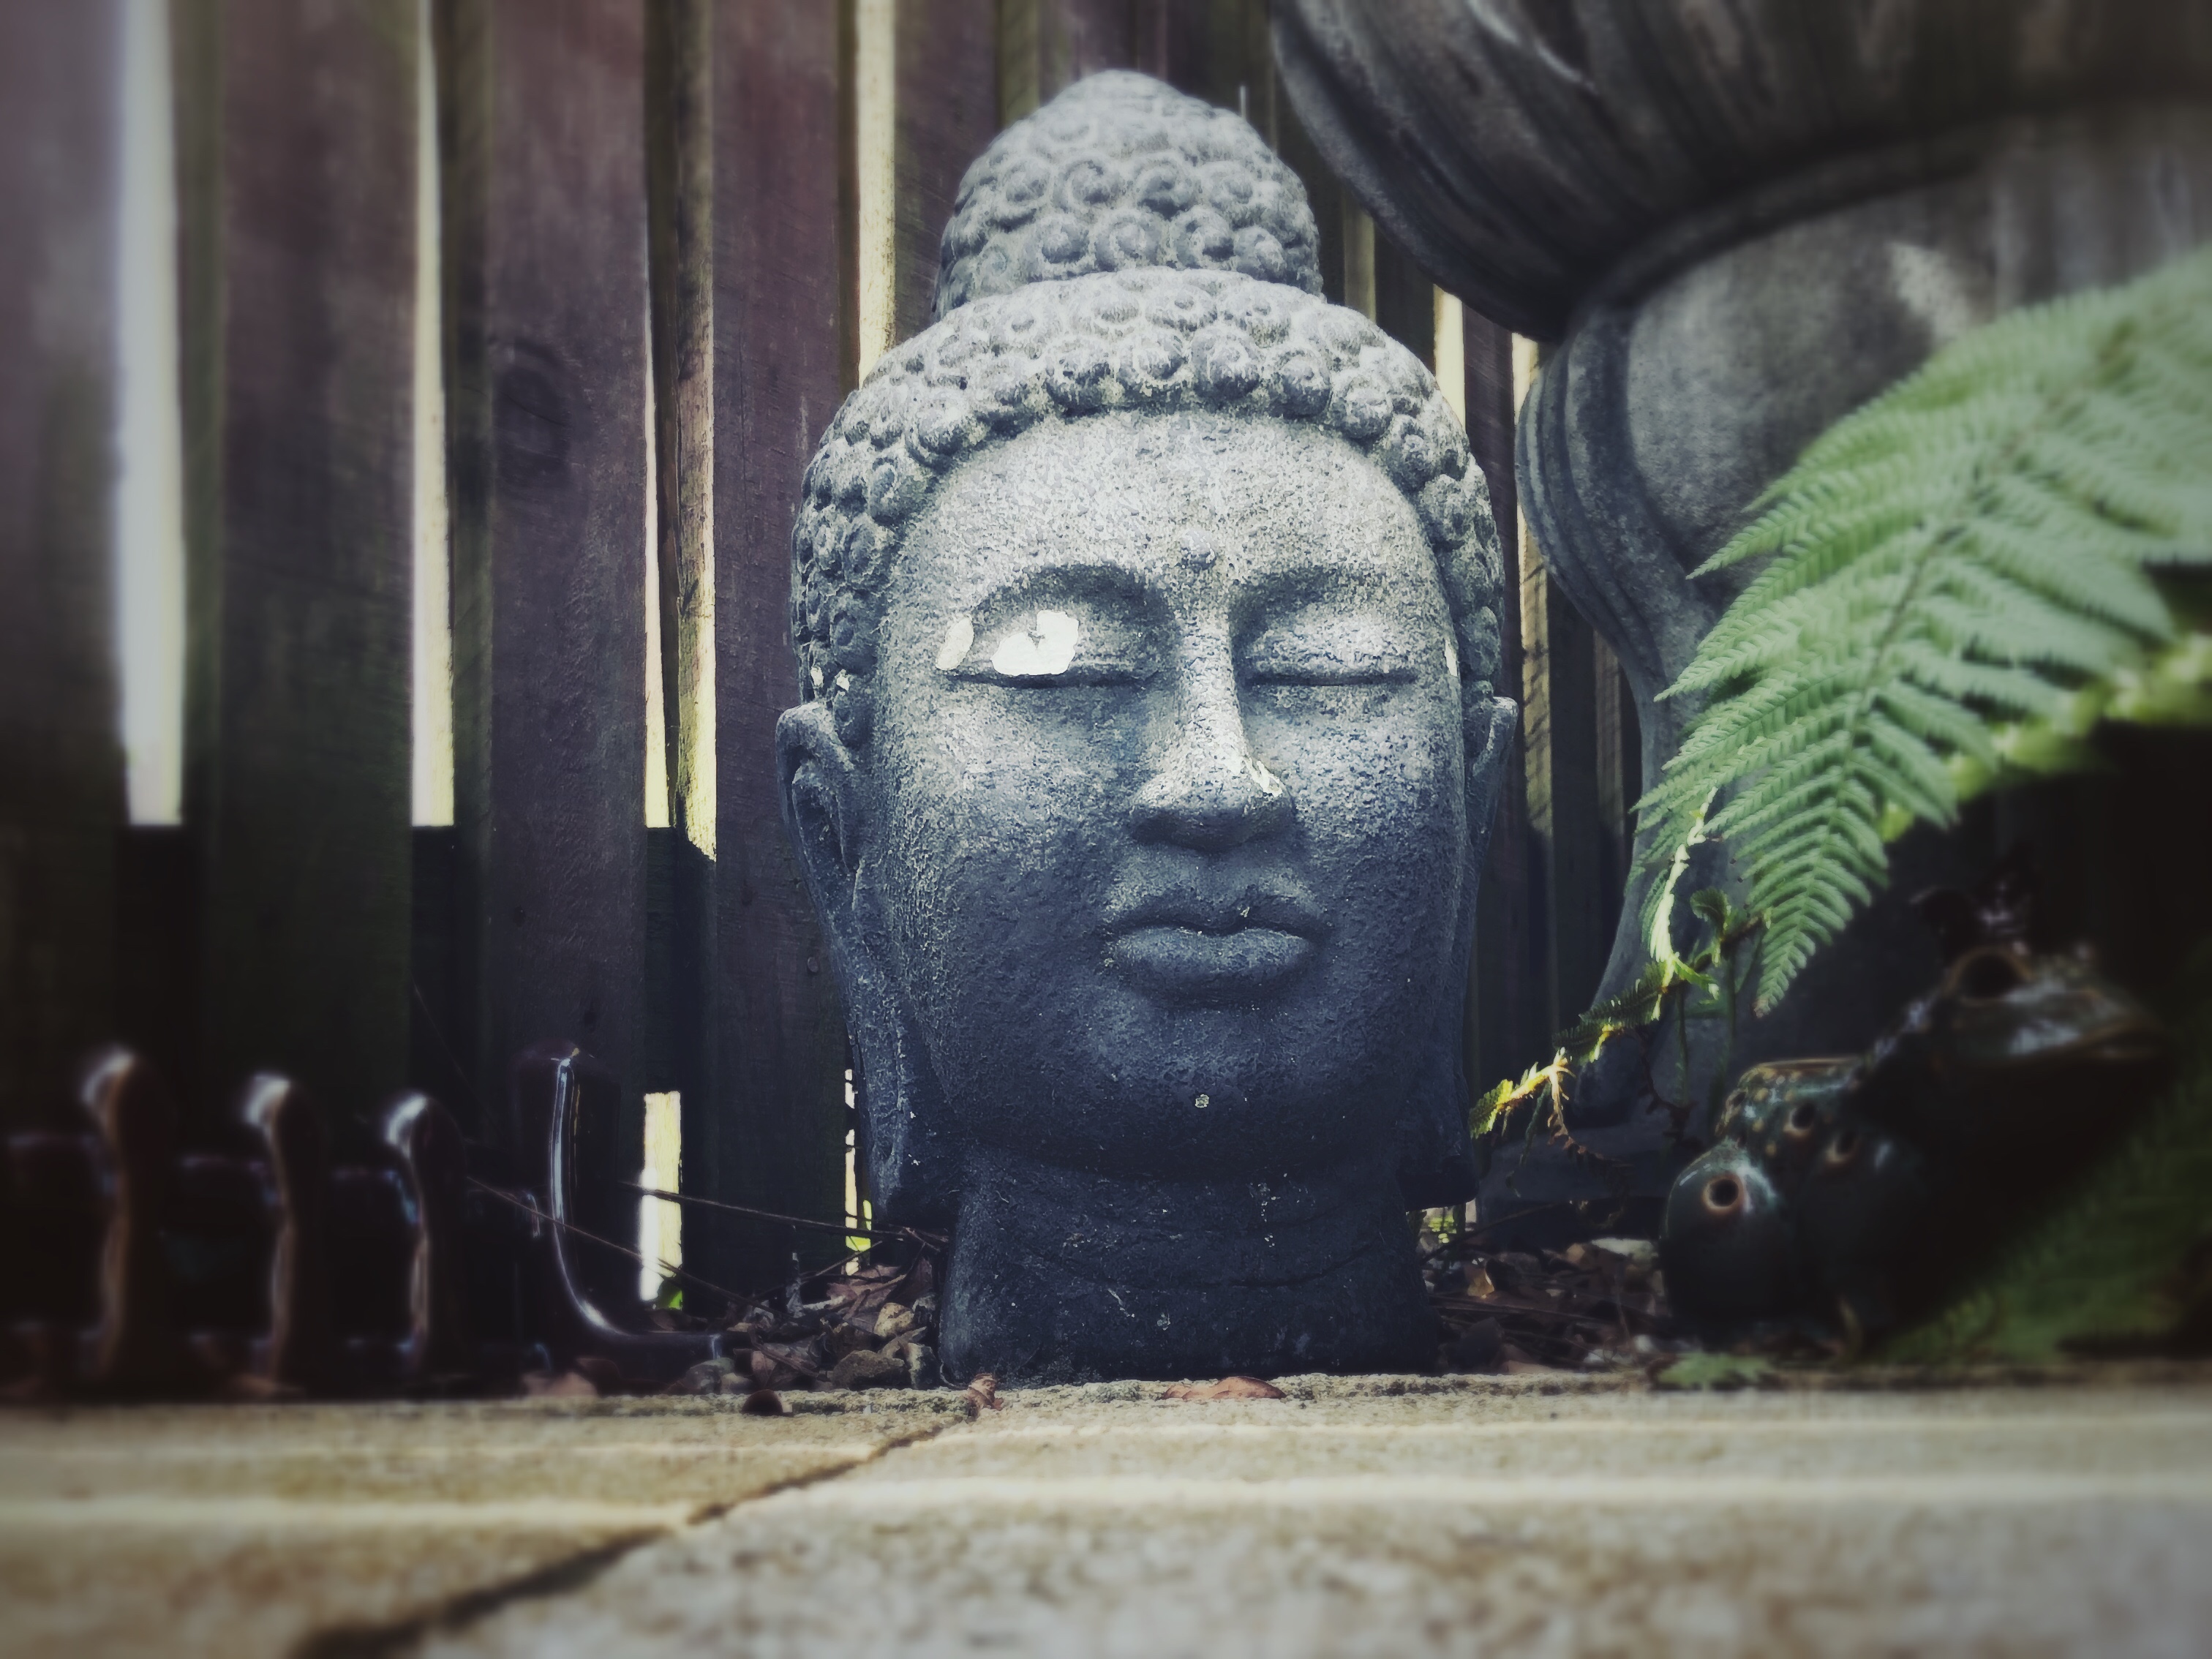 Buddha head statue in a garden next to a fence.